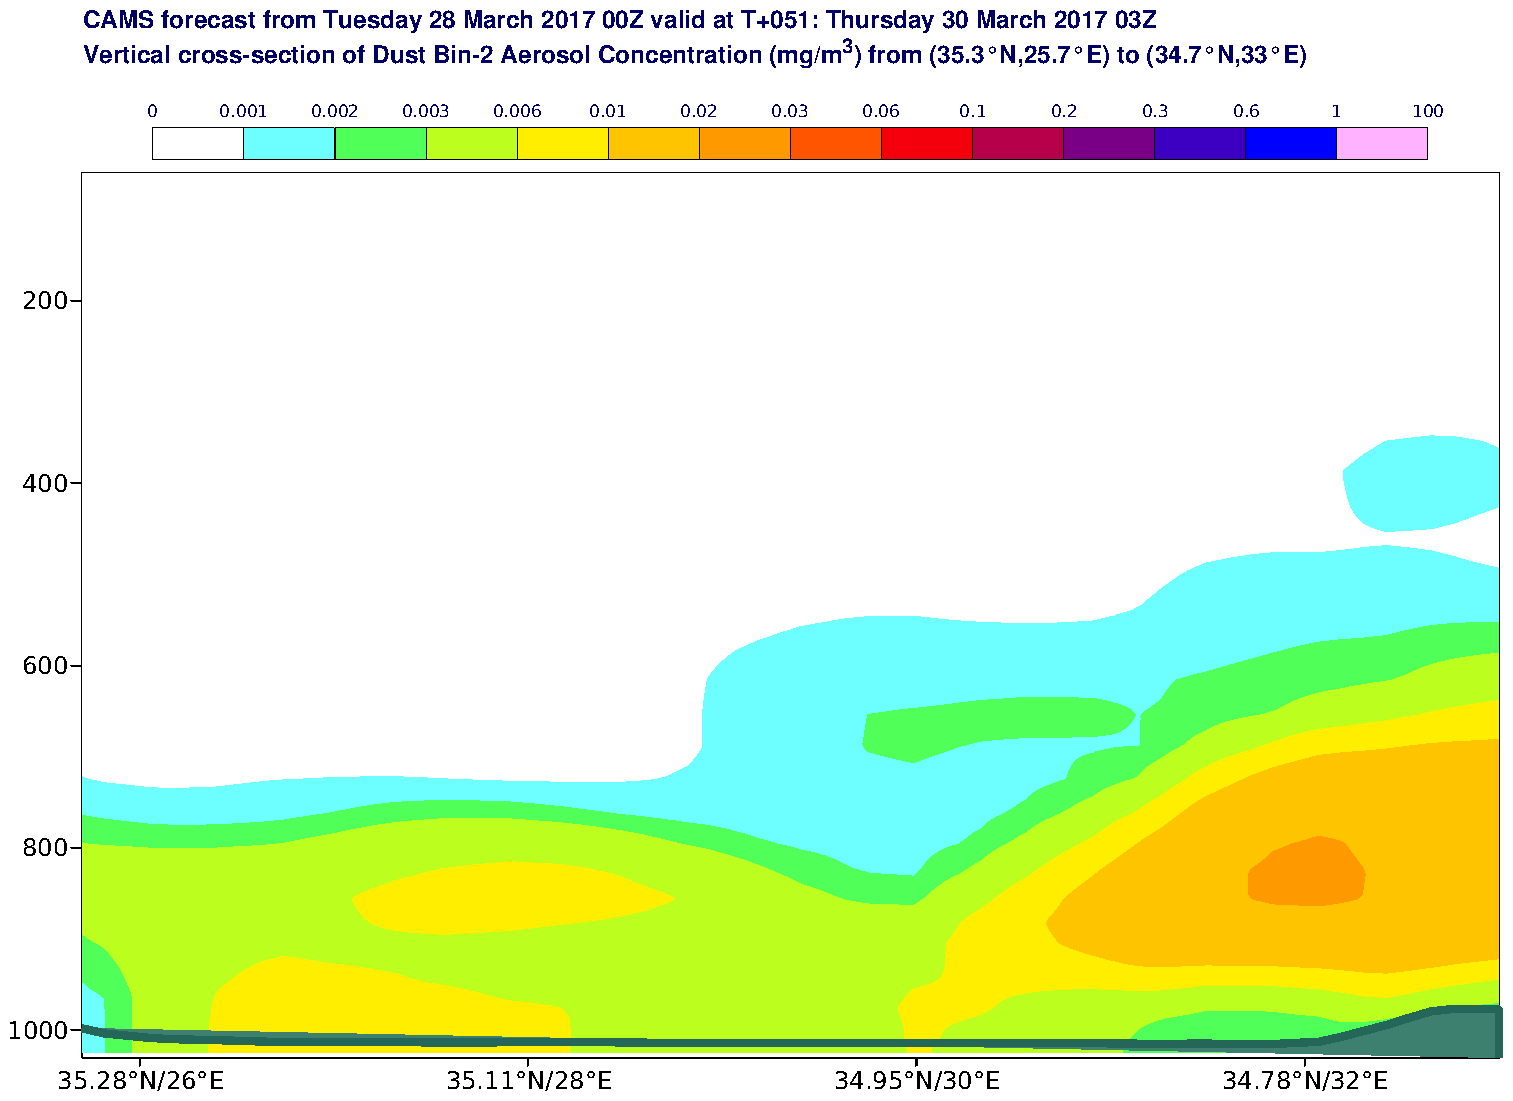 Vertical cross-section of Dust Bin-2 Aerosol Concentration (mg/m3) valid at T51 - 2017-03-30 03:00